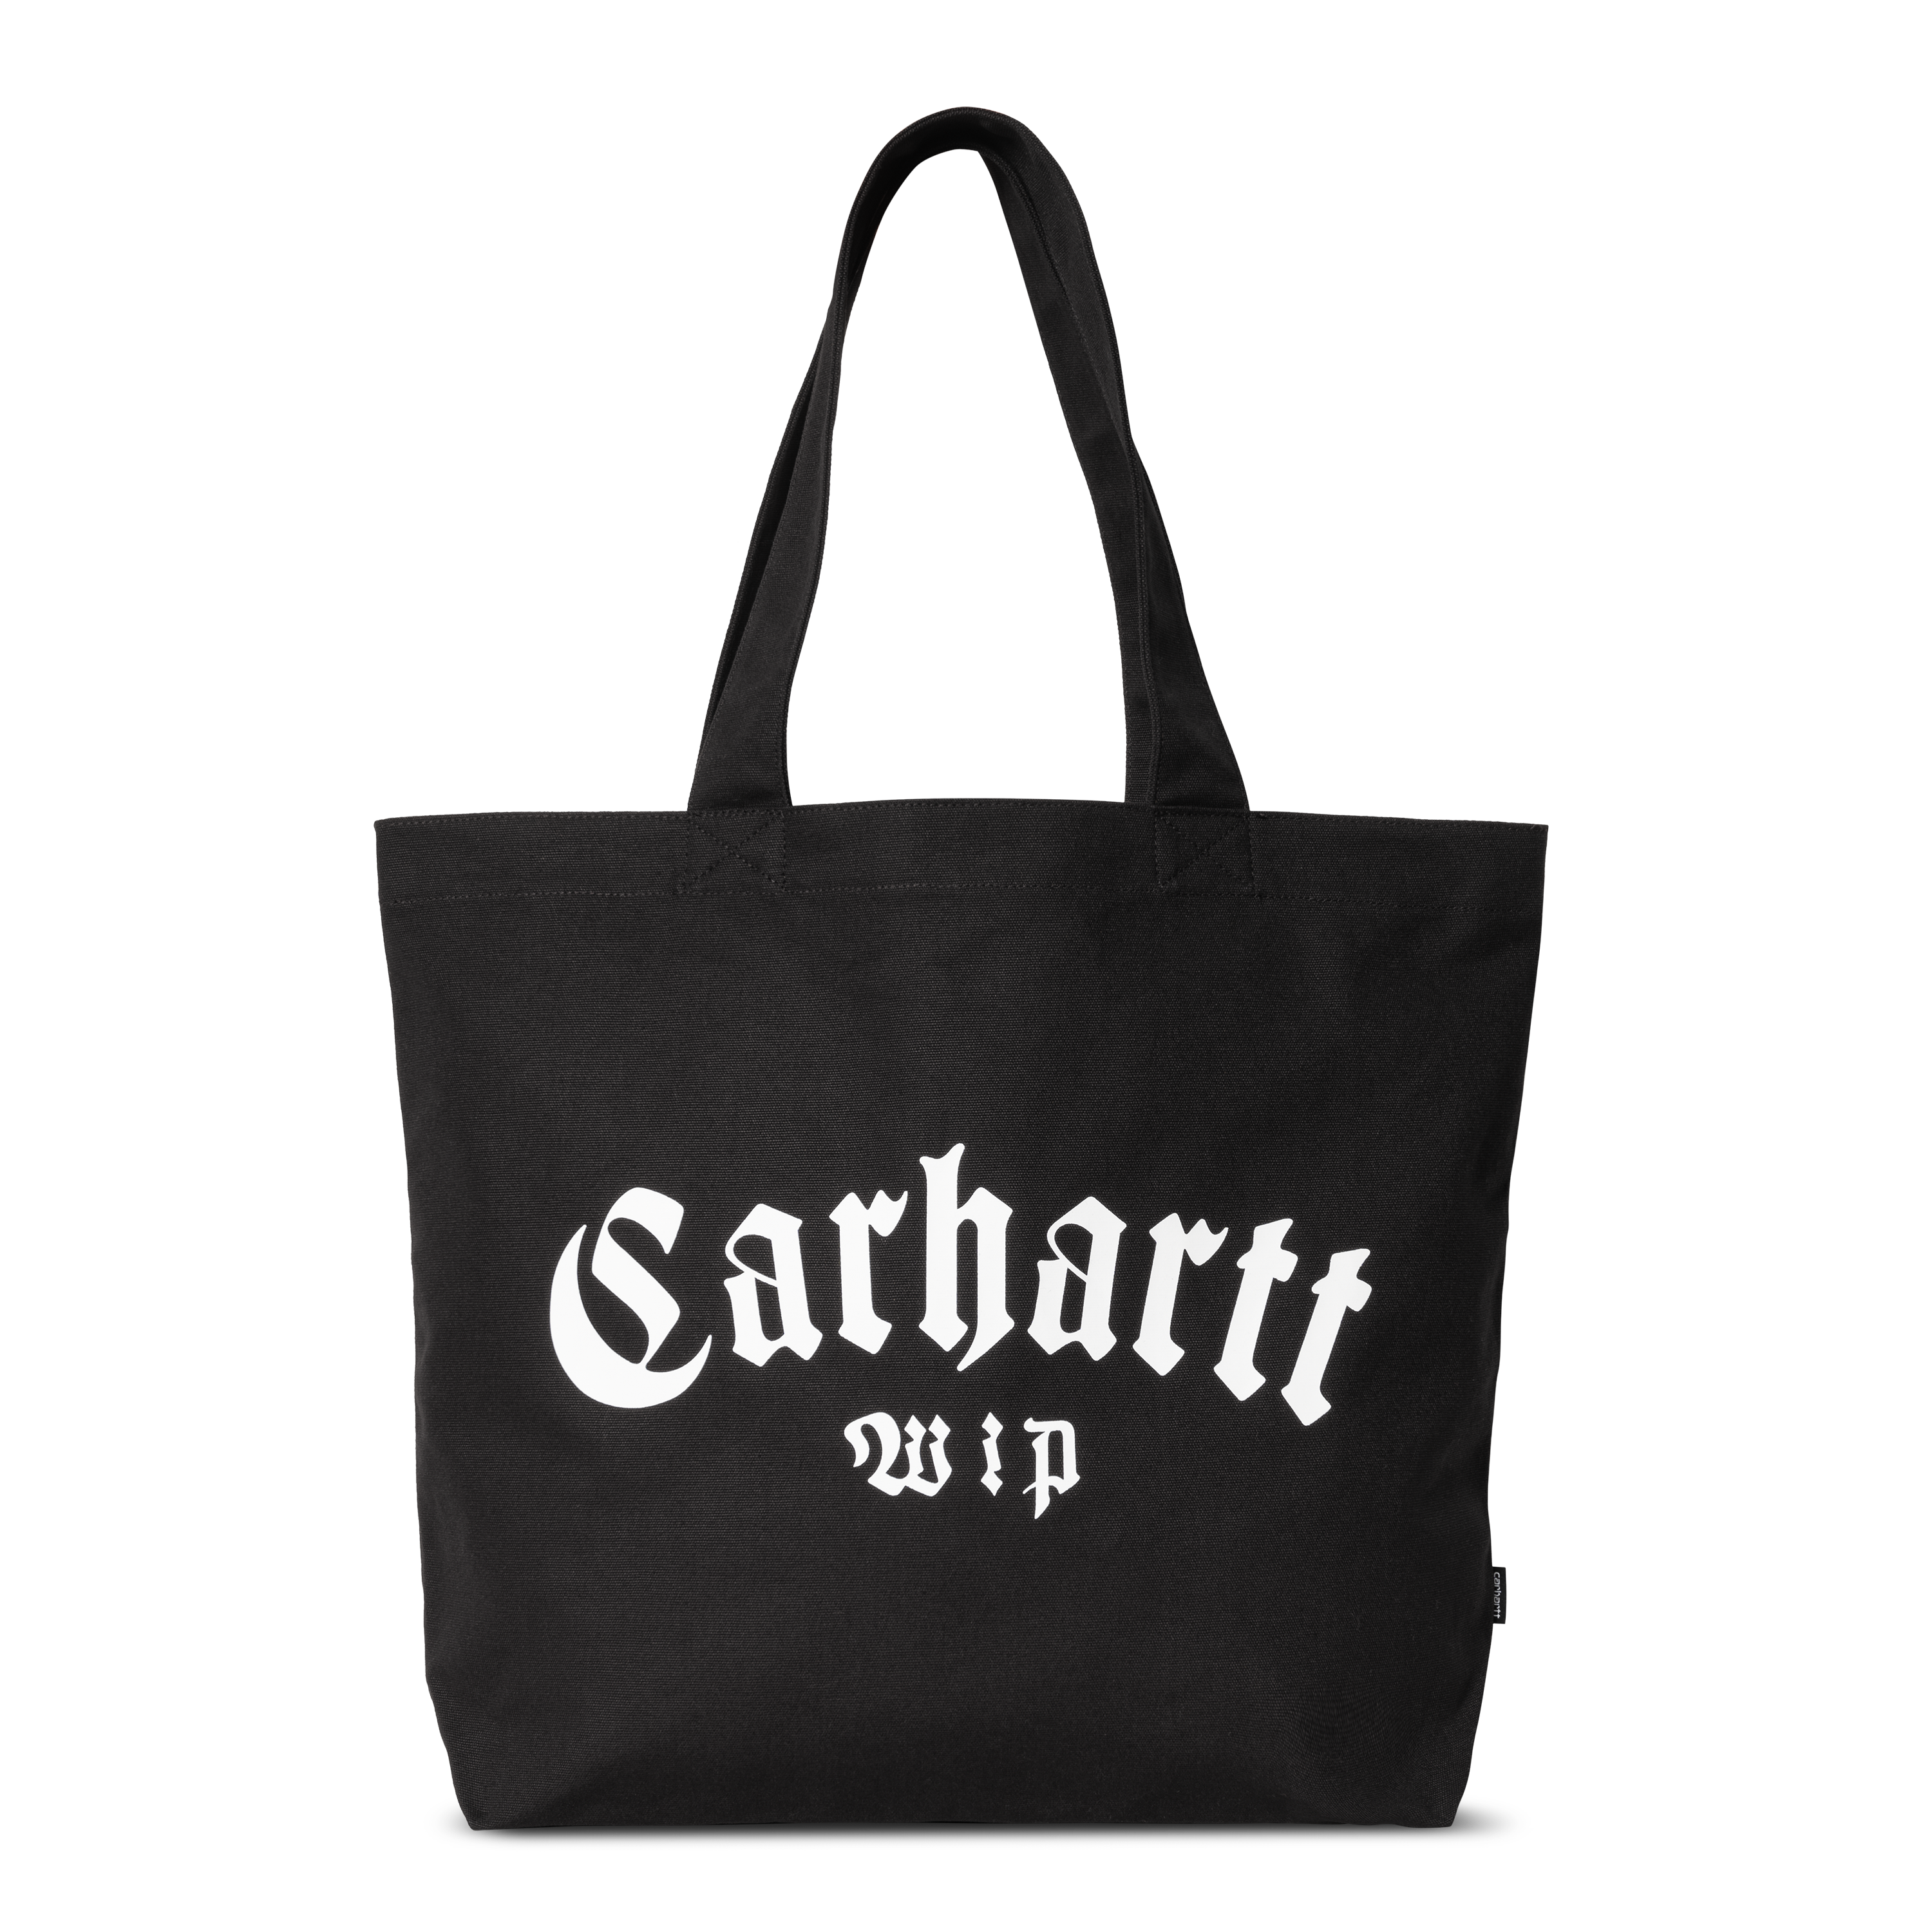 Carhartt WIP Canvas Graphic Tote Large in Black